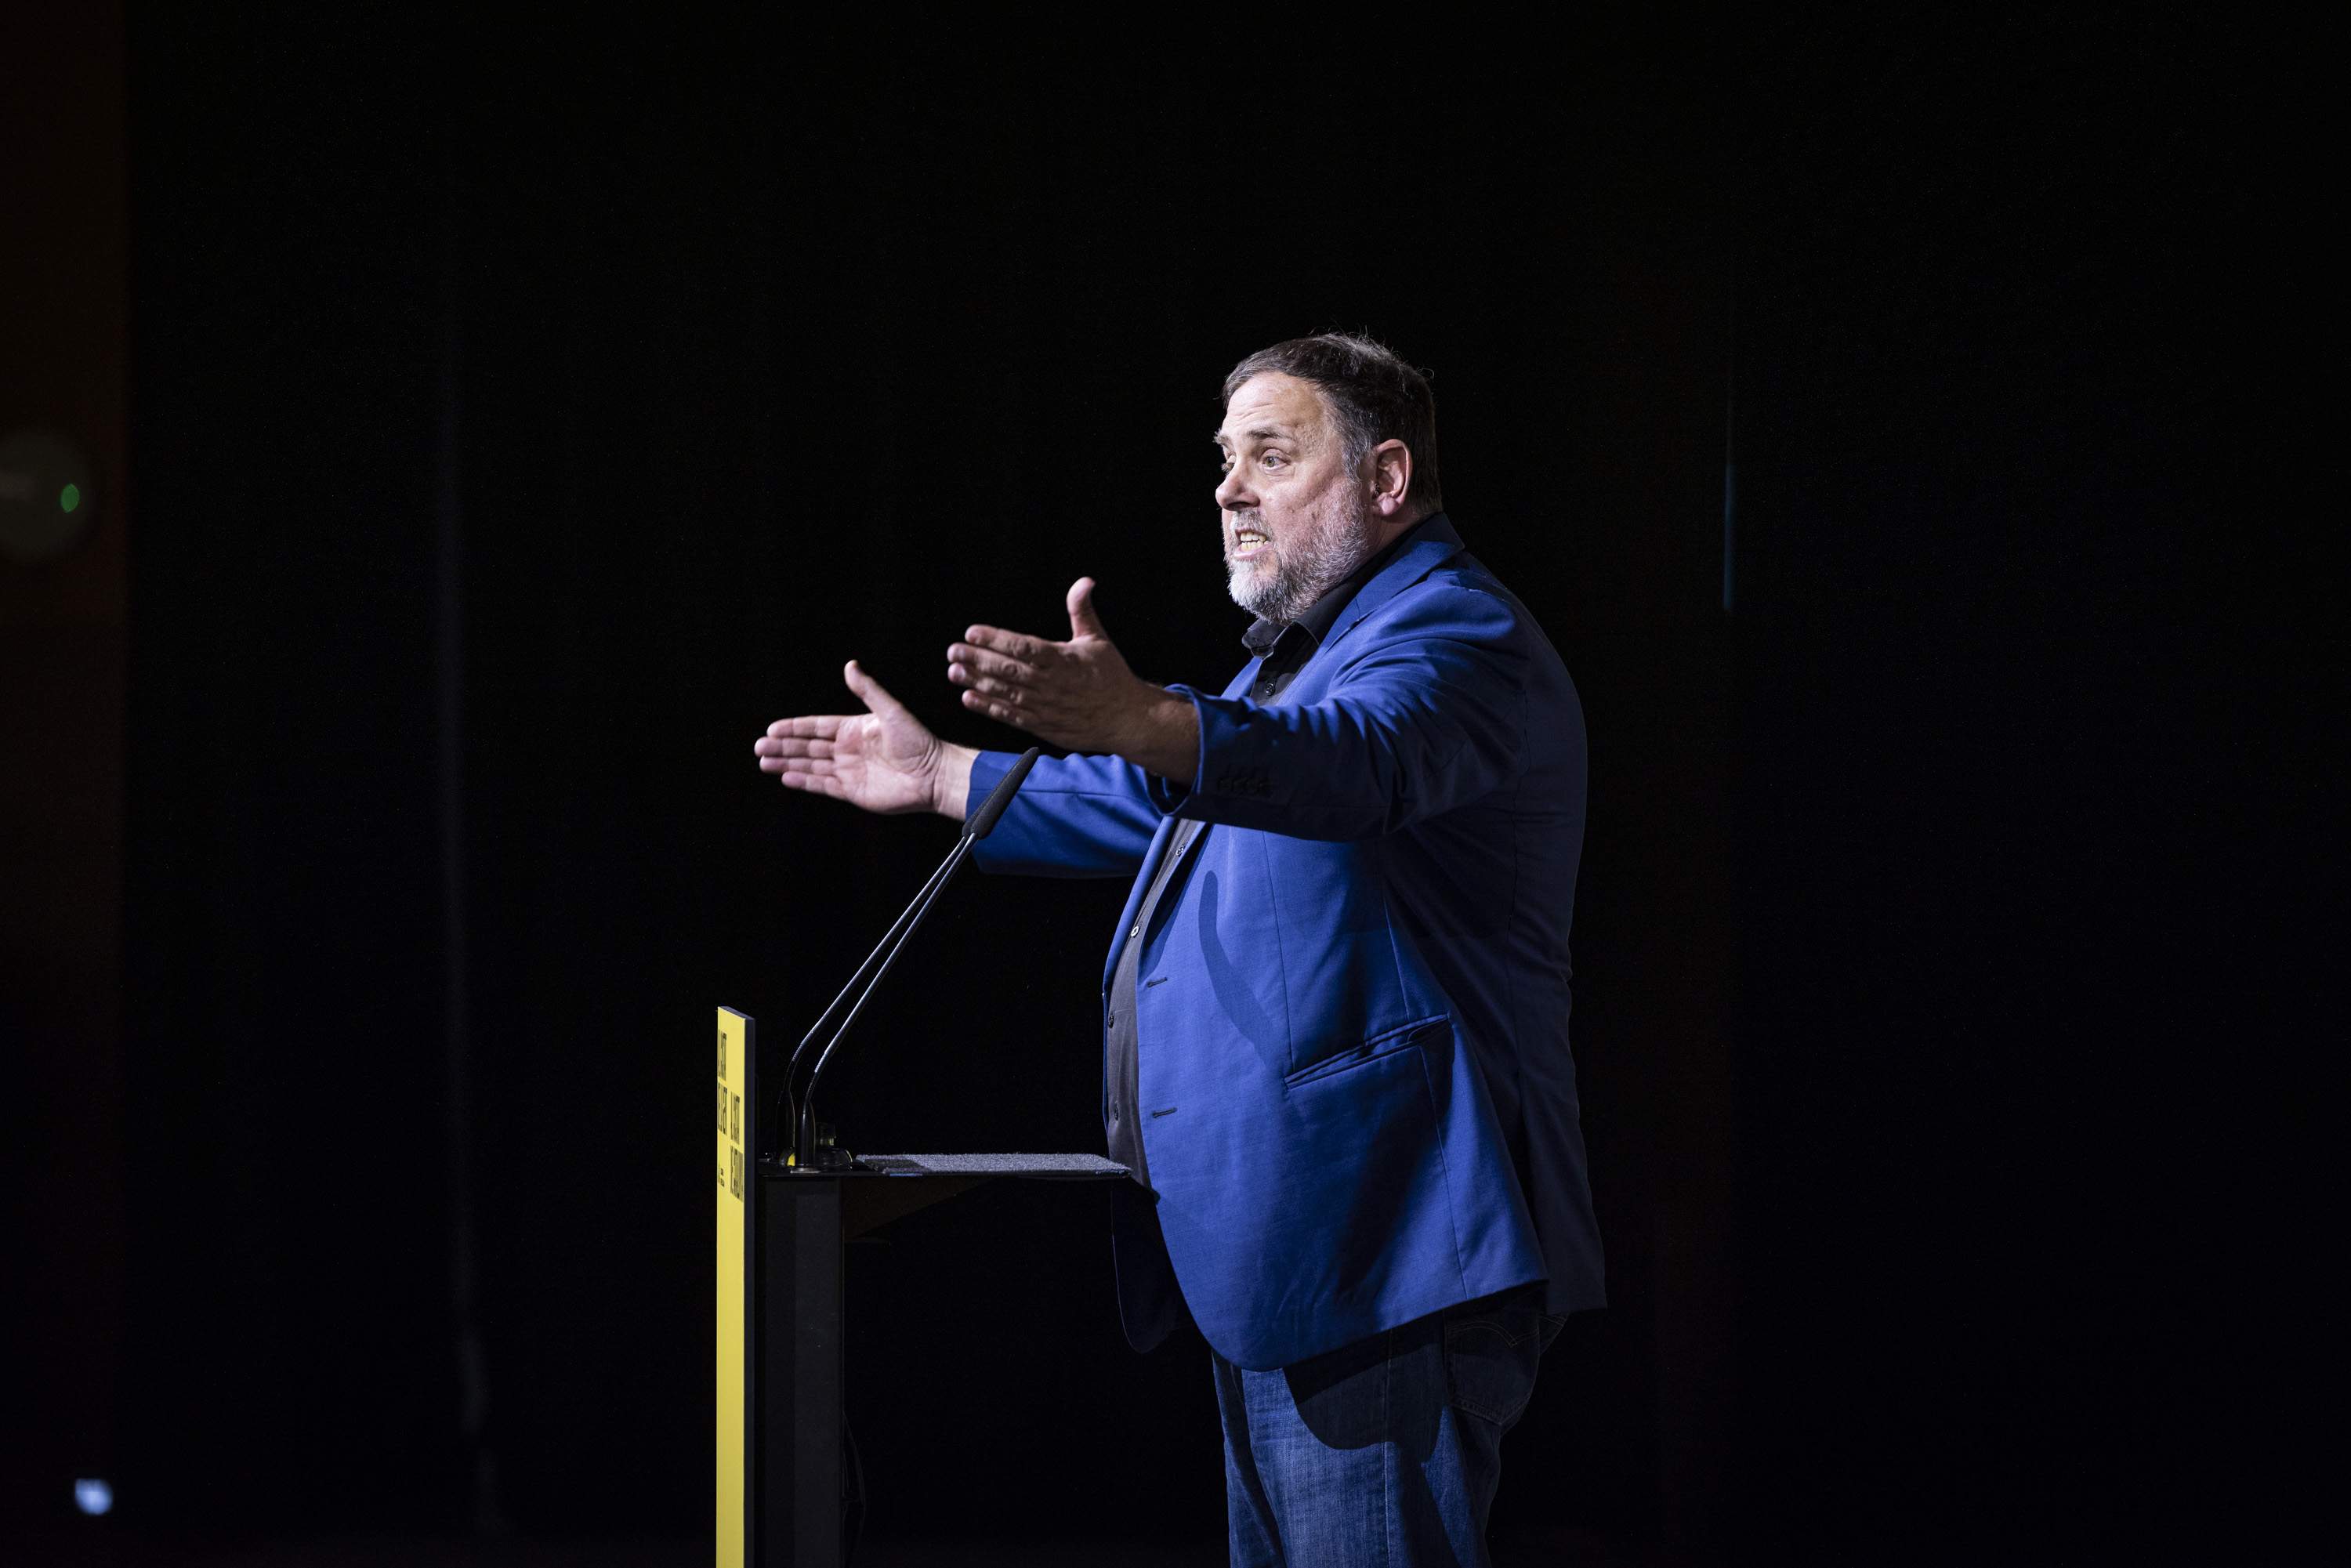 Oriol Junqueras will leave the ERC presidency after the European elections to decide his future